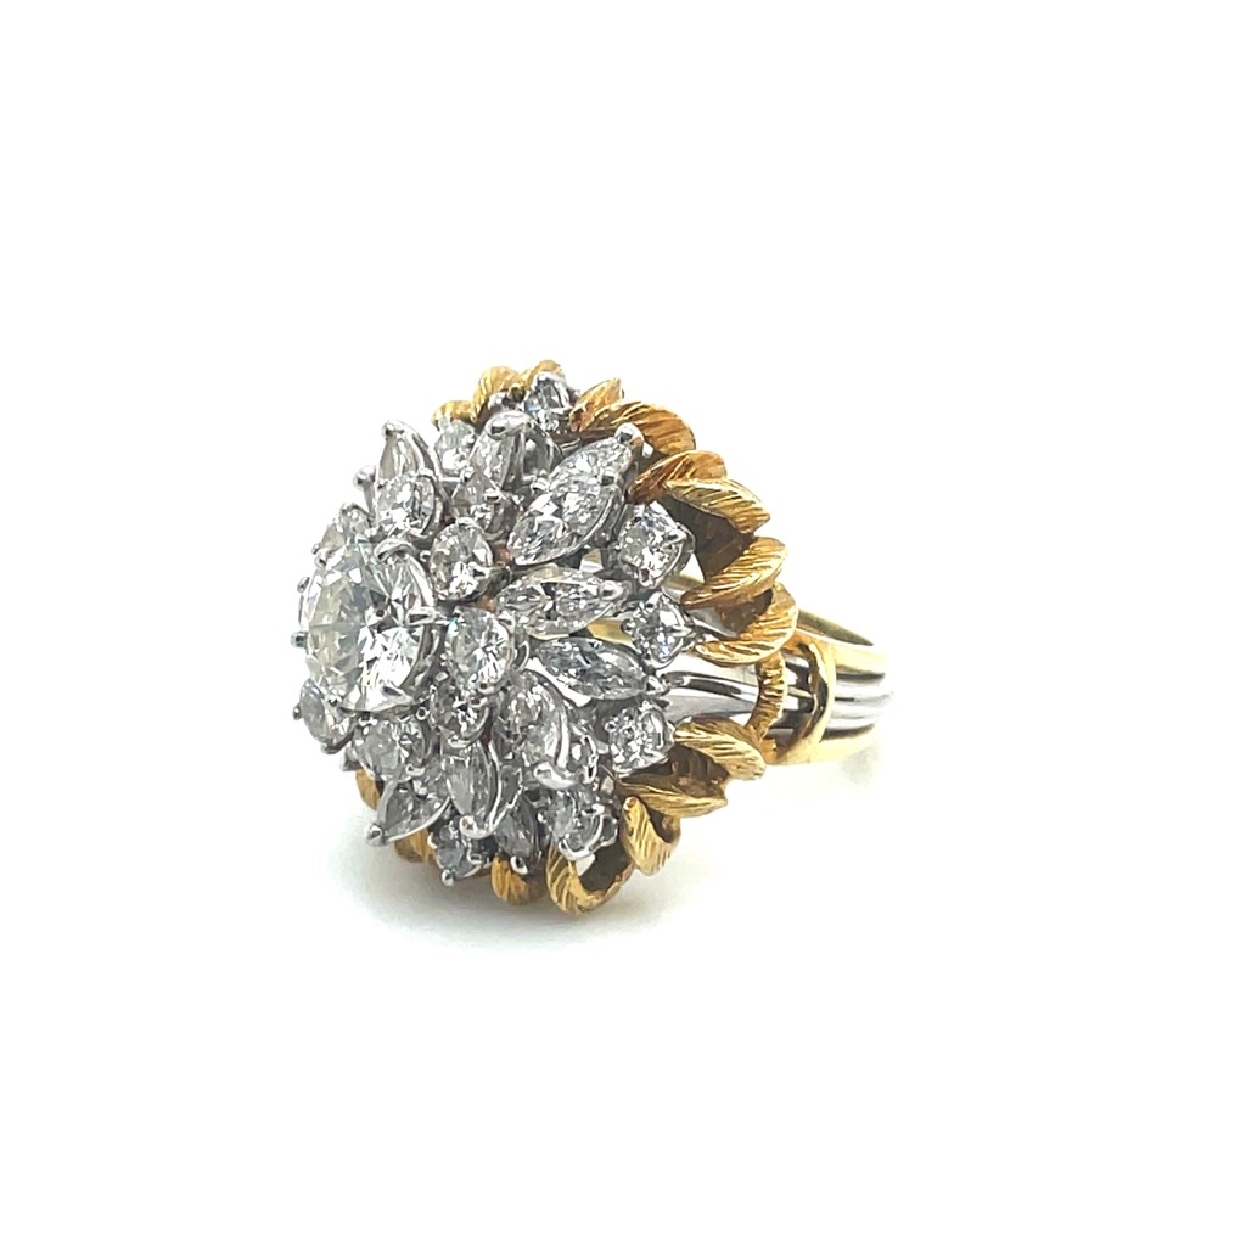 18K White Gold Diamond Cluster Ring Featuring Round and Marquise Cut Diamonds with a 18K Yellow Gold Claw Style Ring Guard. 20 RBC Diamonds 7-10 points each; 16 Marquise Diamonds 17-20 Points Each; and 1.5CT Round in Center

Size 5.5 